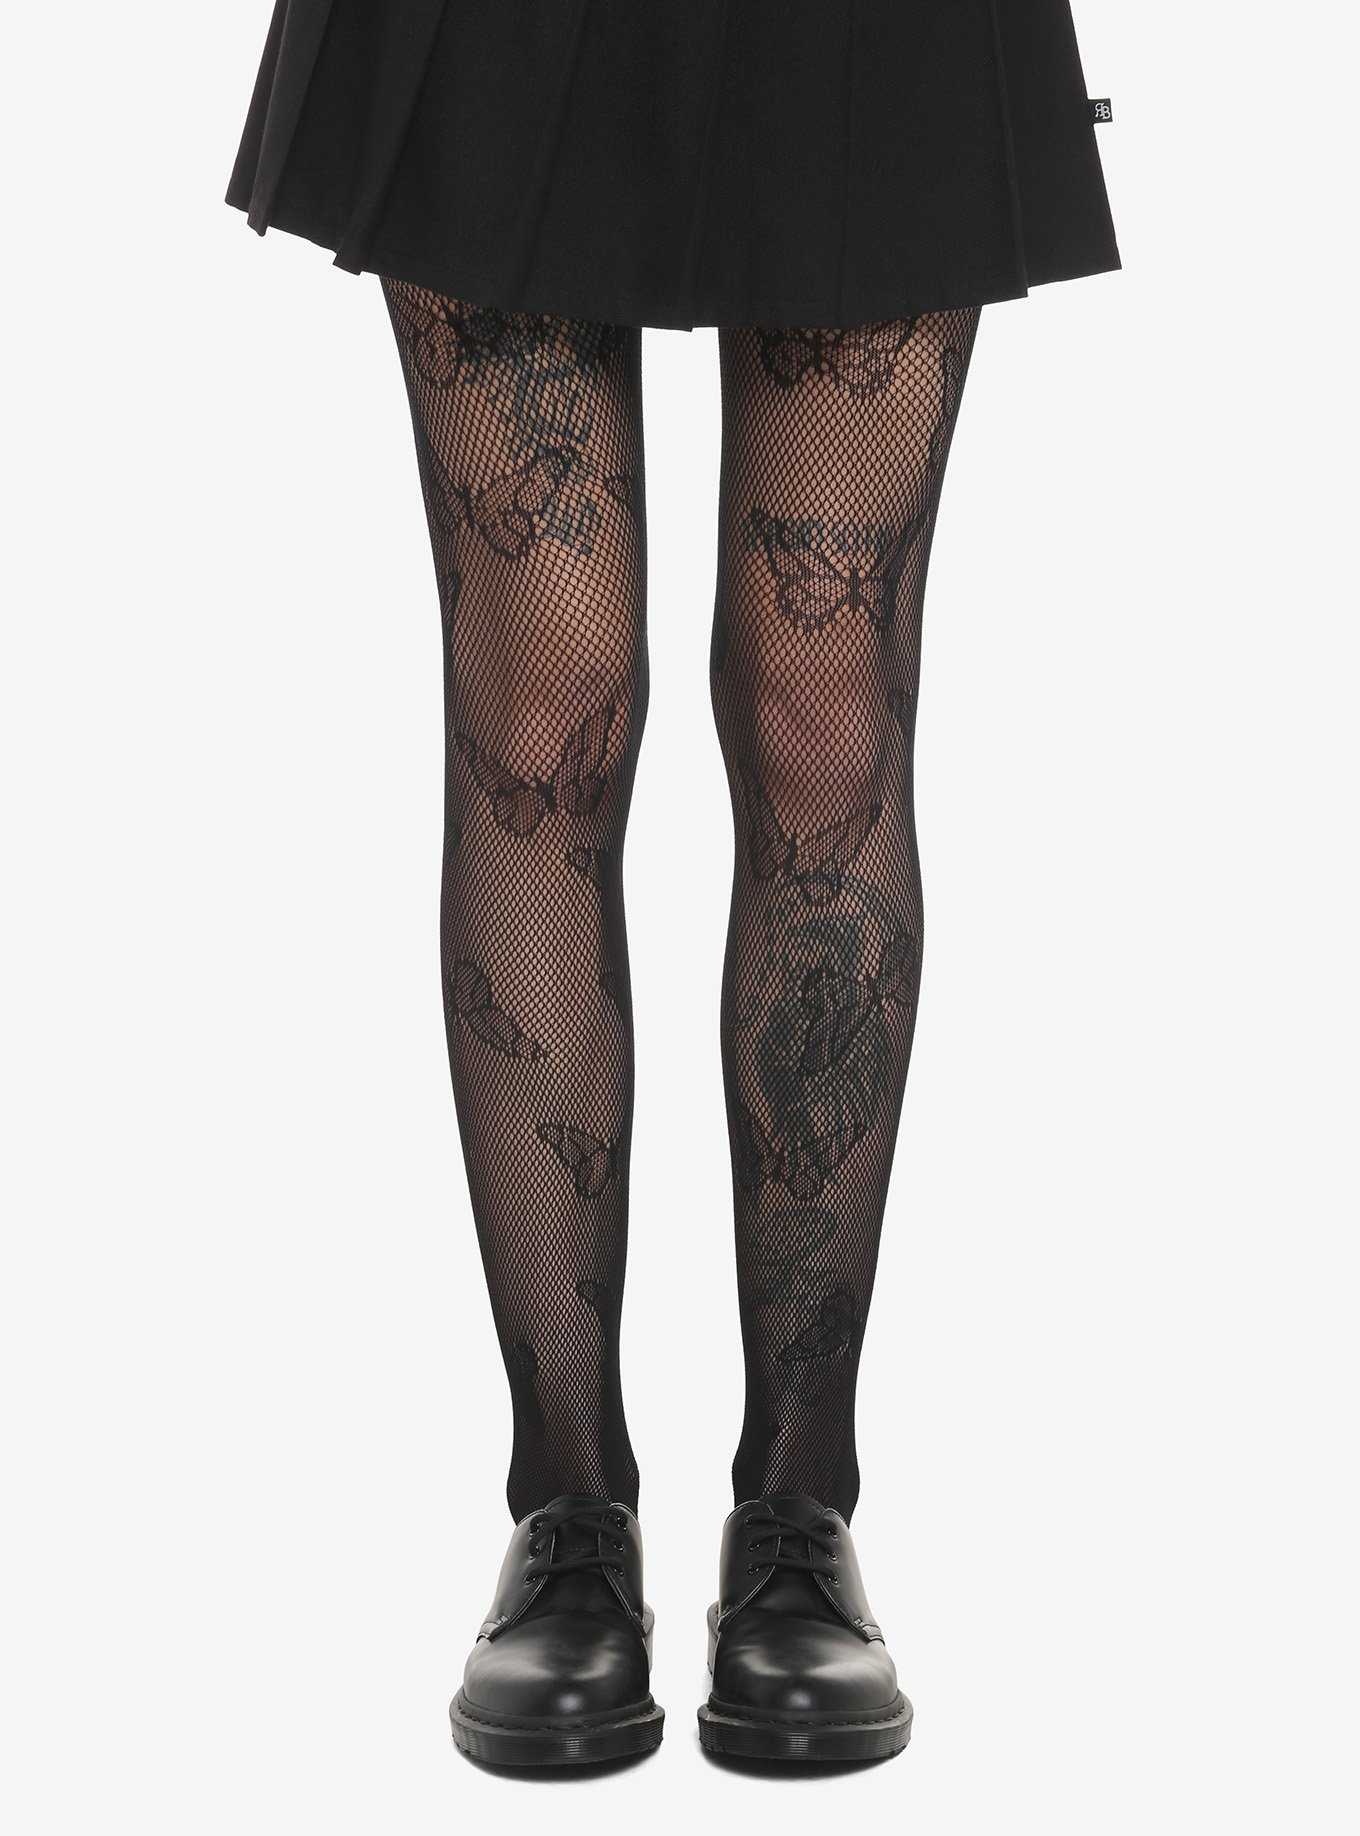 Hot Topic: North Riverside Park - We have some new cute tights and thigh  highs in stock now 💕